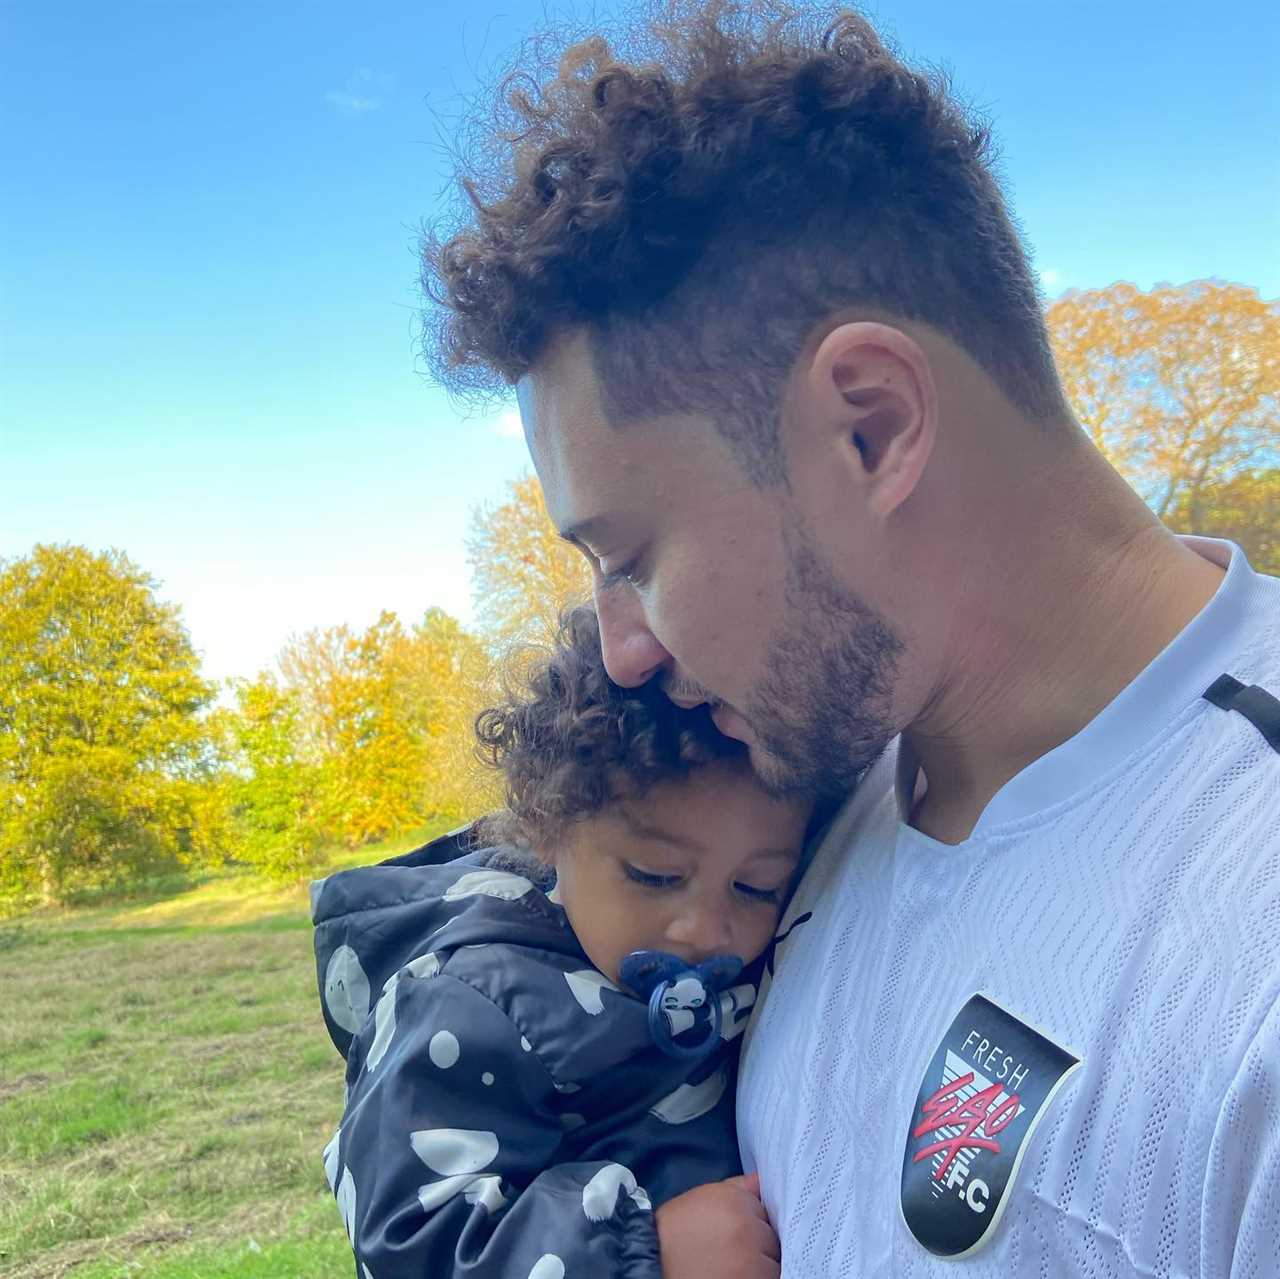 X Factor star becomes a dad for second time as his girlfriend gives birth